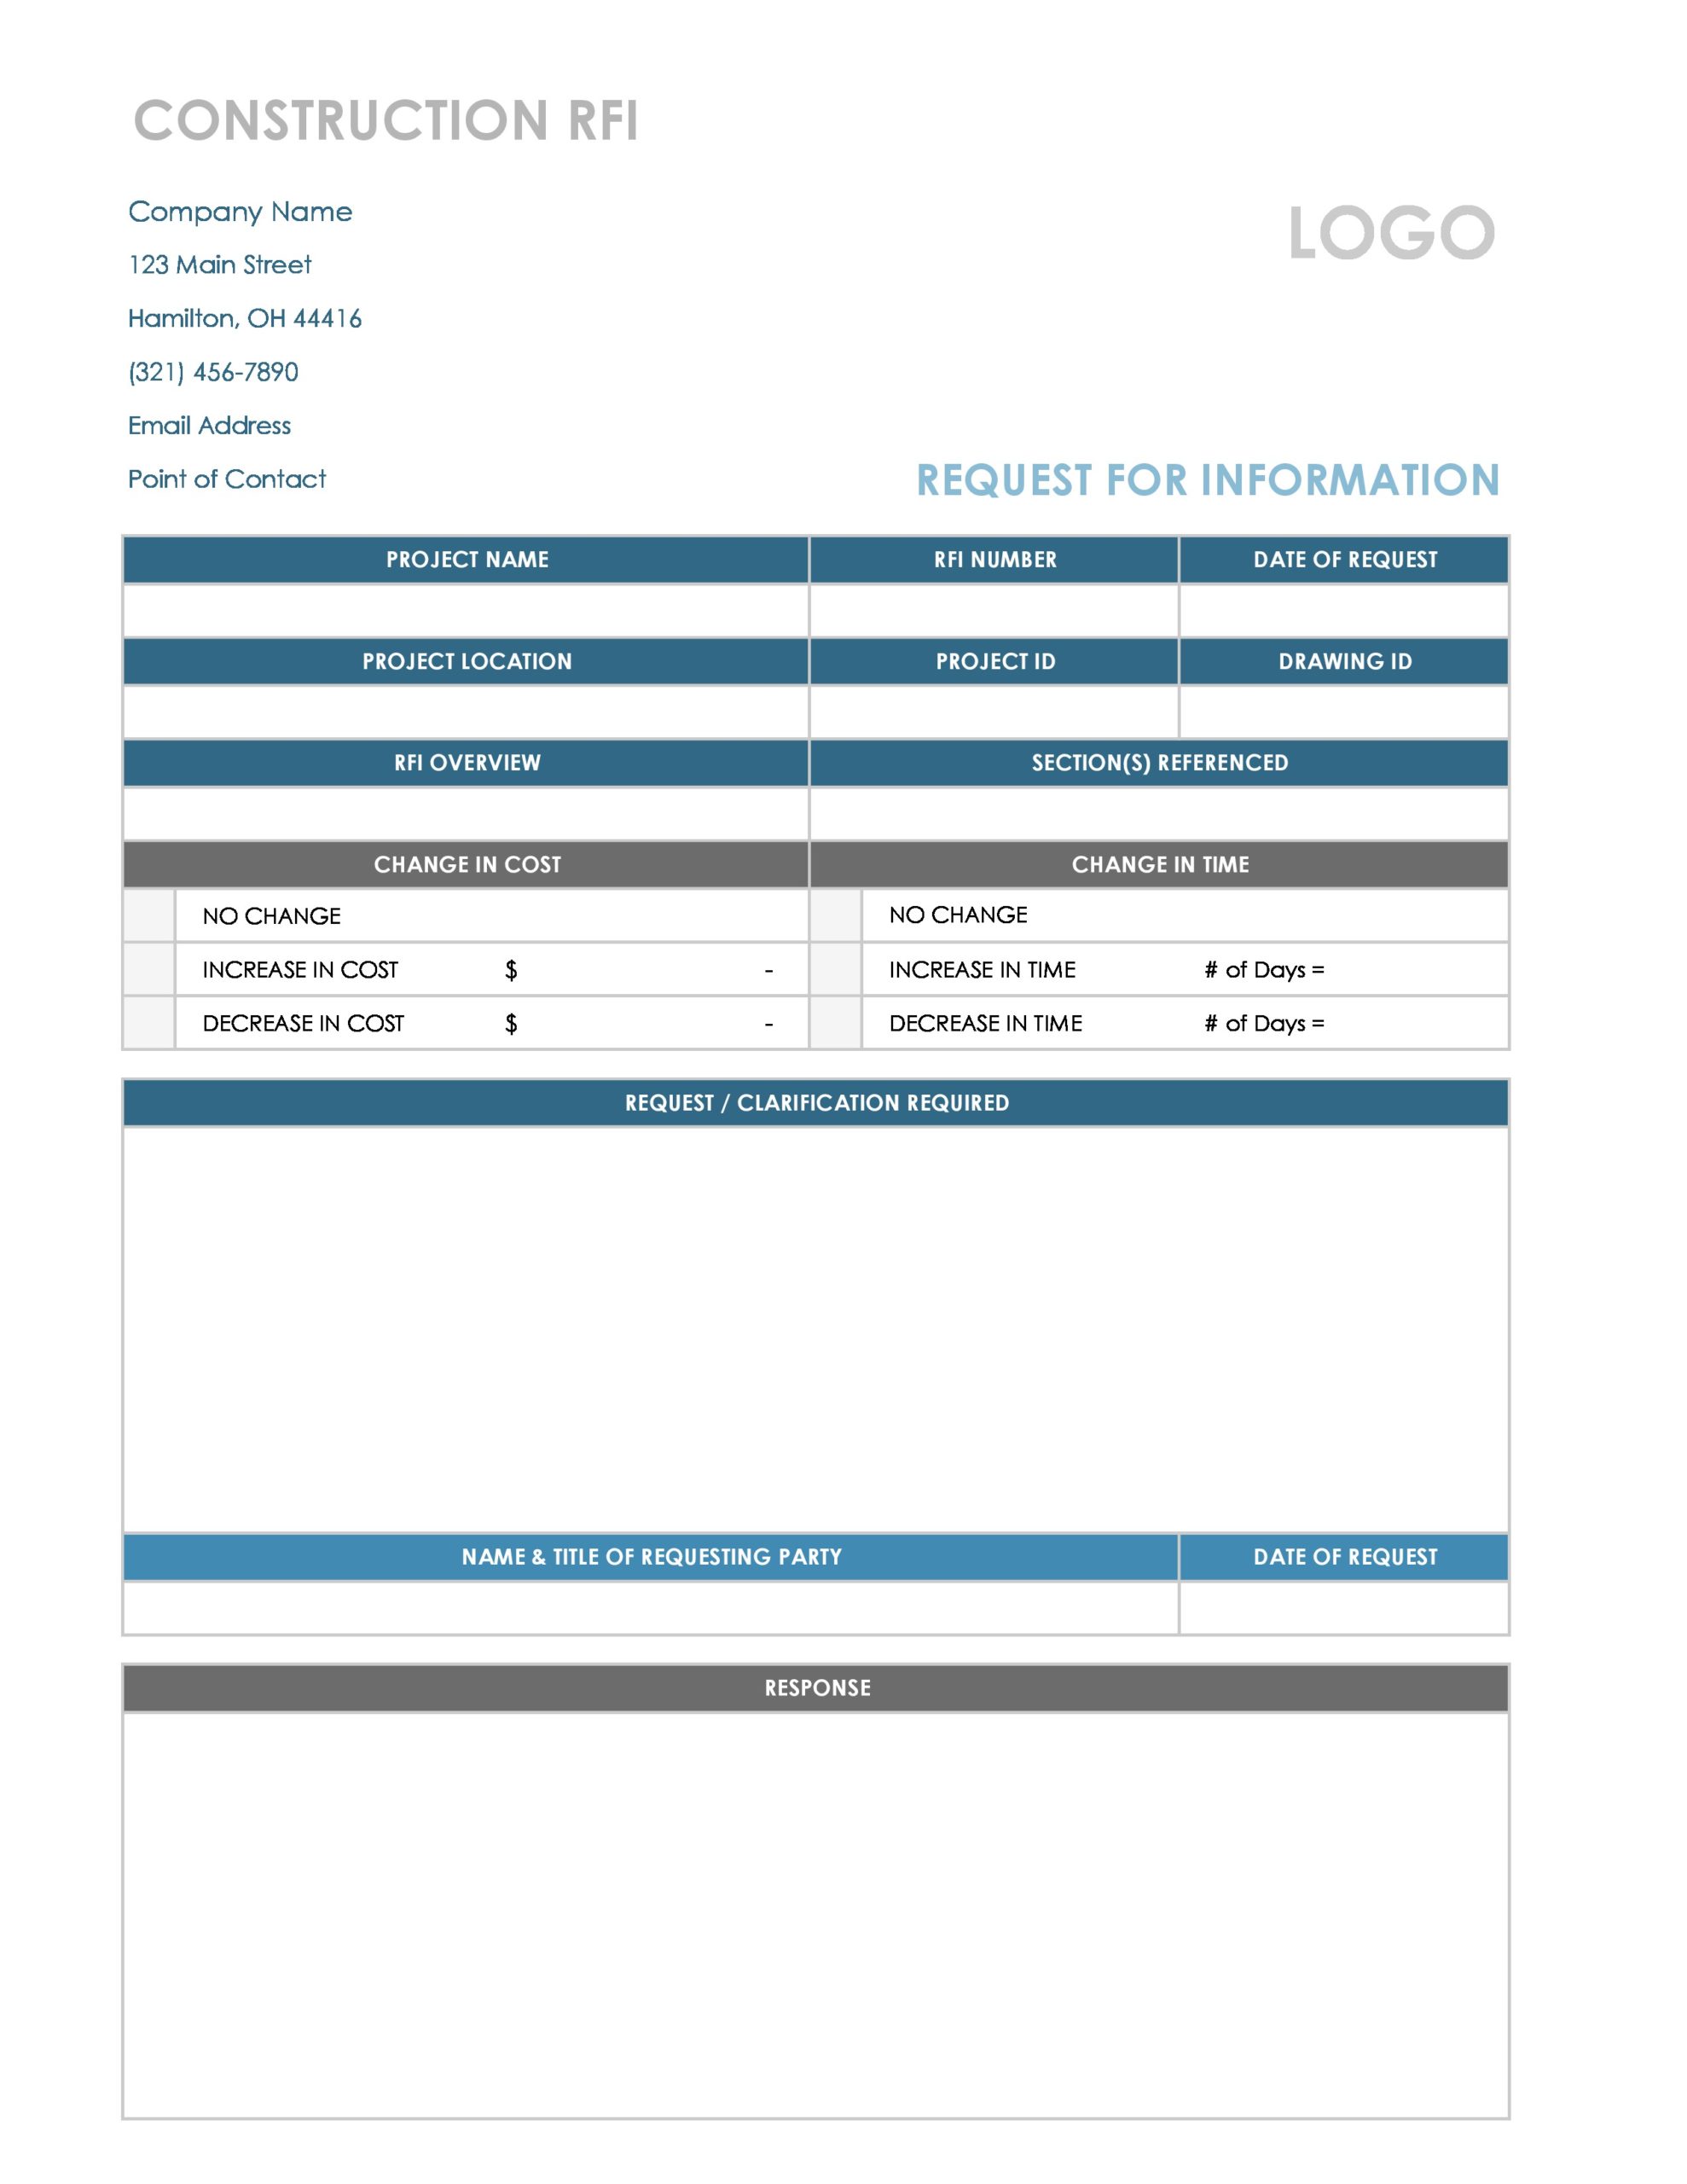 45 FREE Request For Information RFI Templates Forms